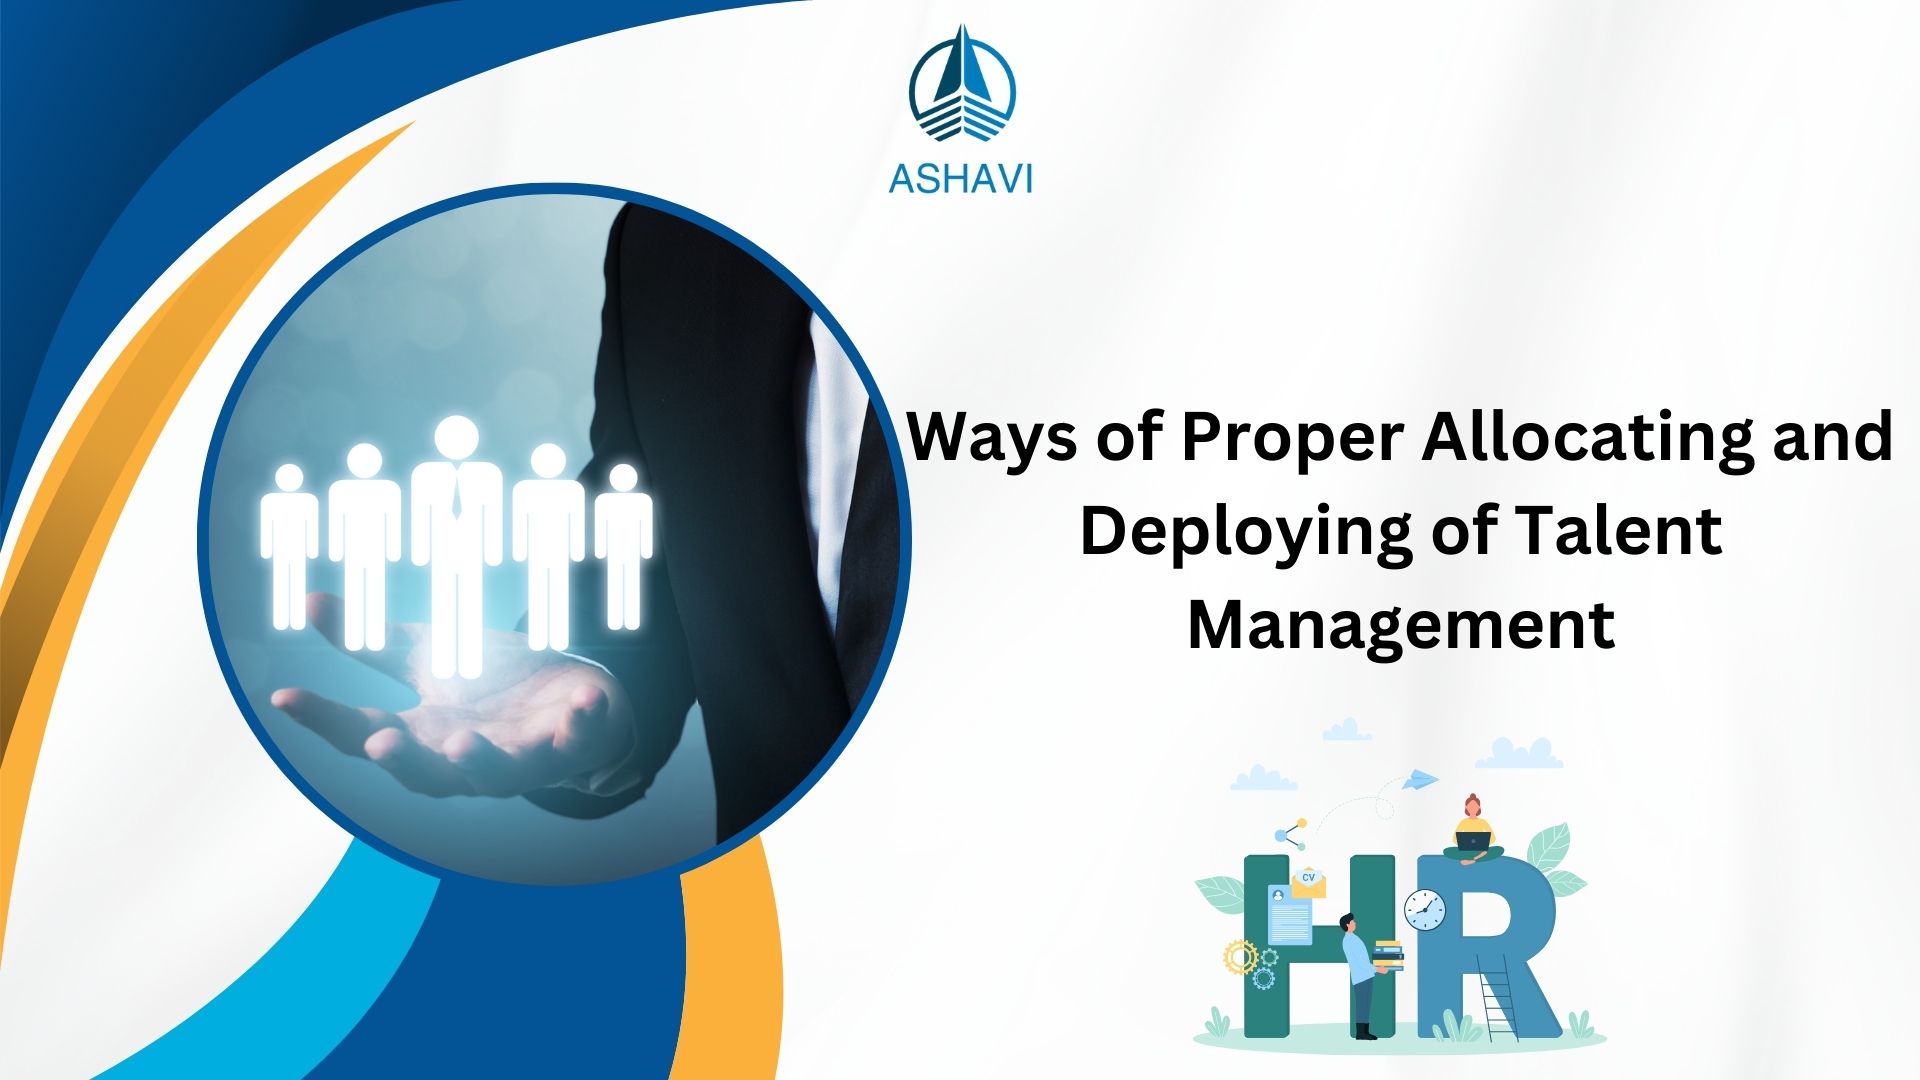 Ways of Proper Allocating and Deploying of Talent Management